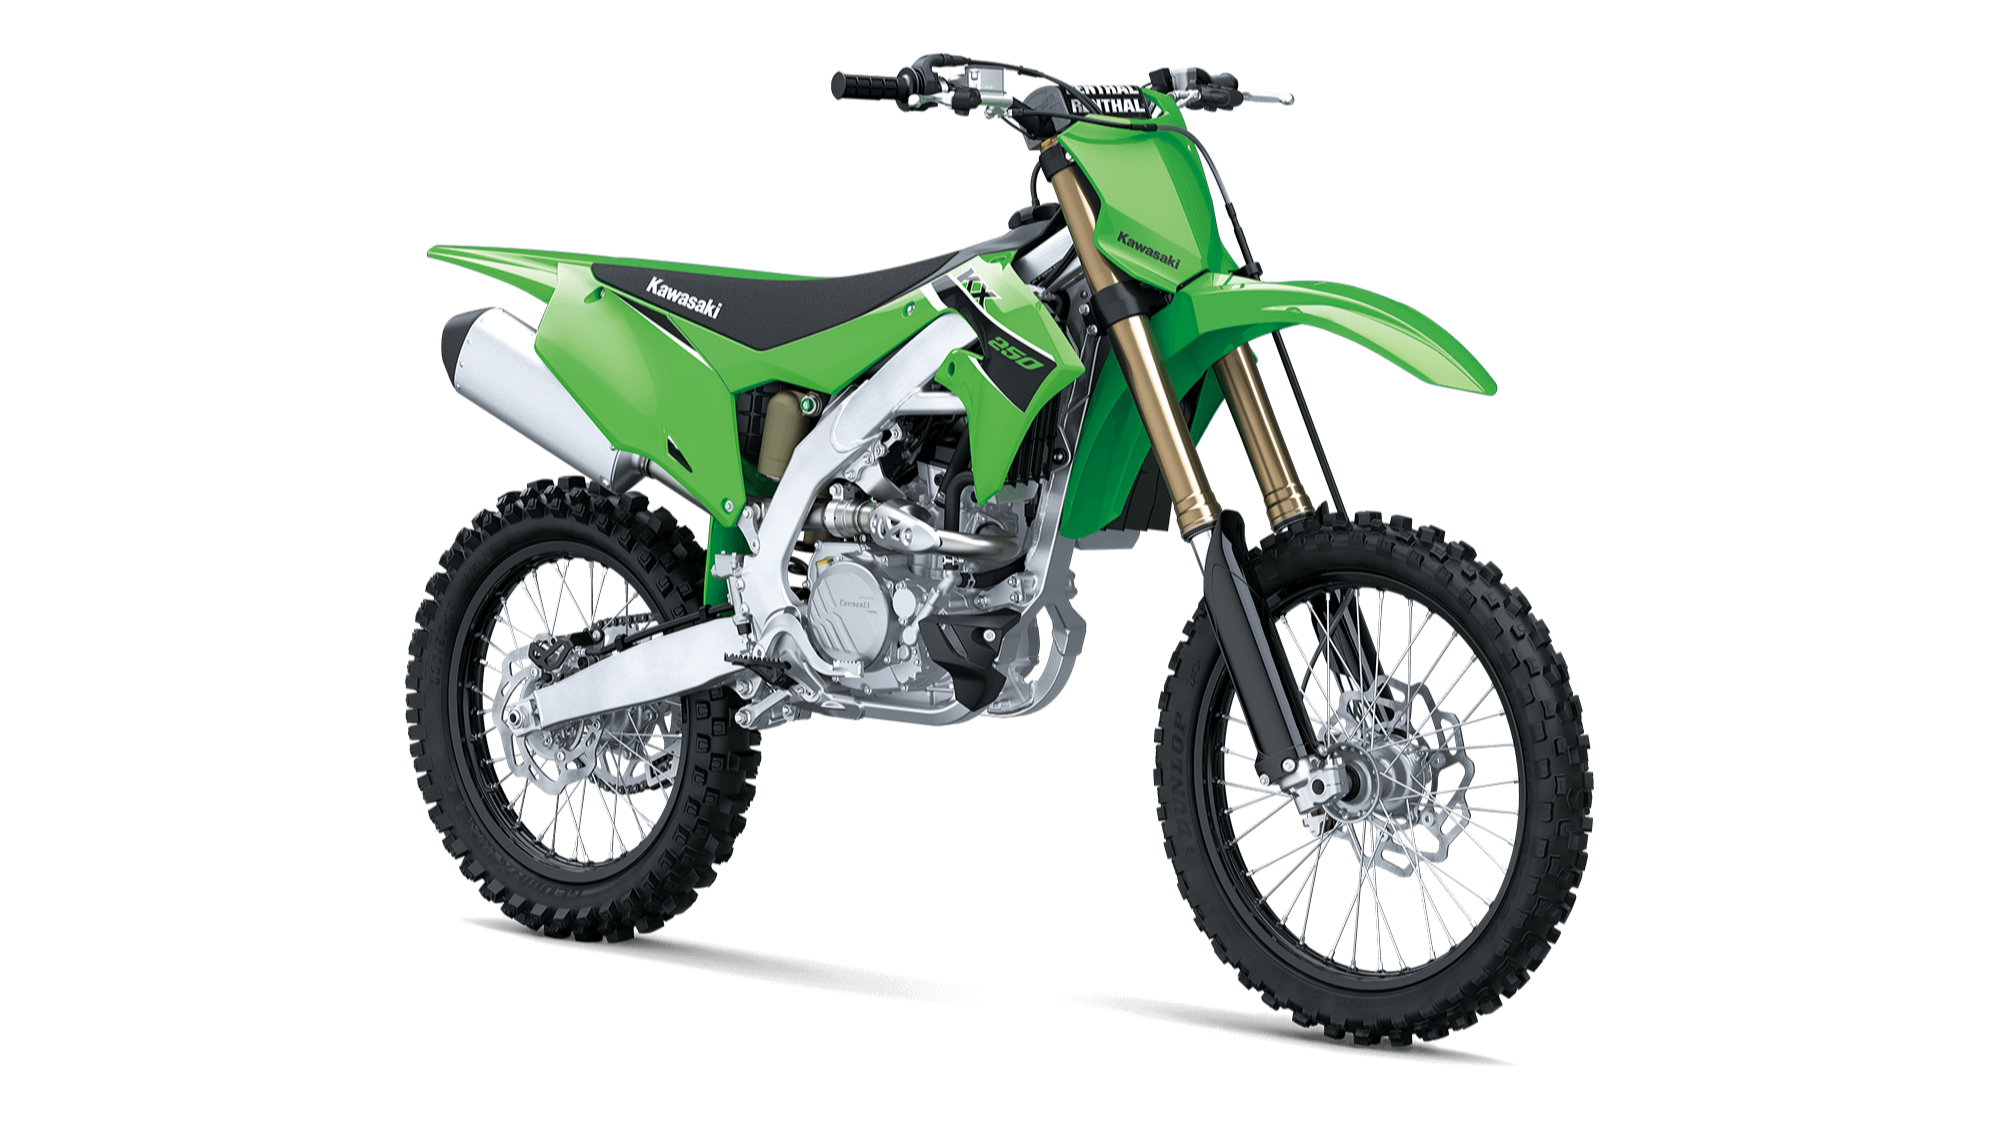 KX™250:LEARN MORE